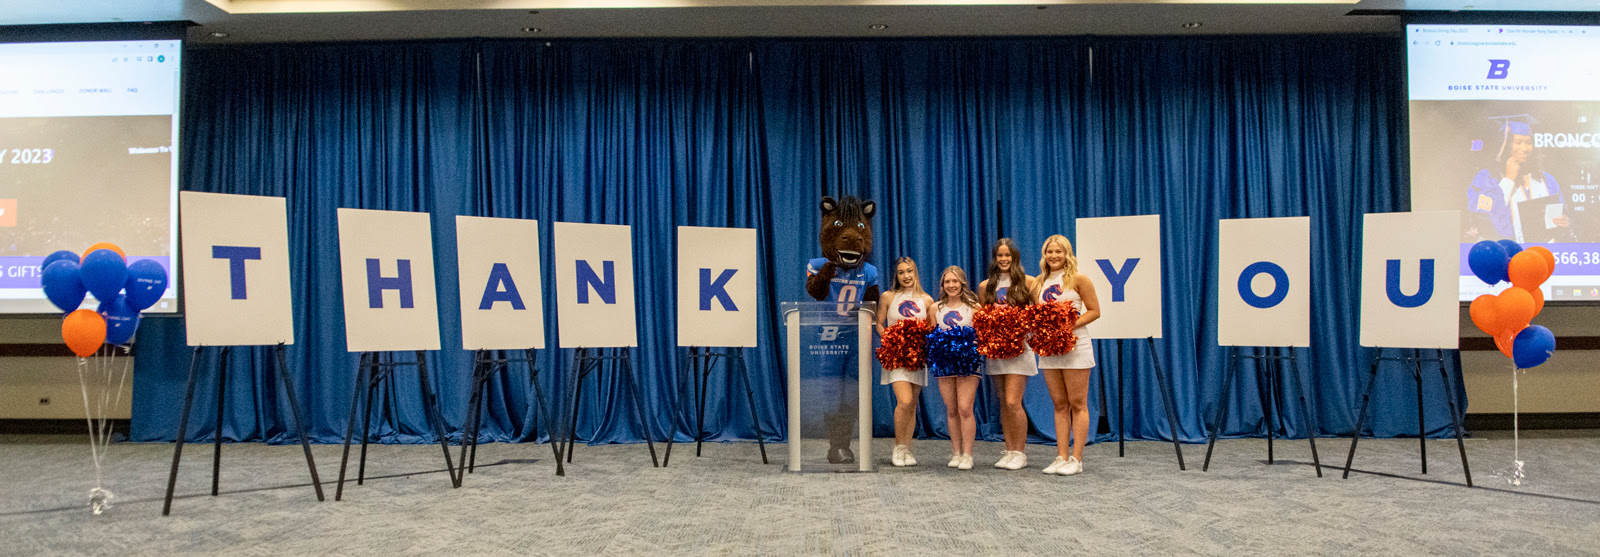 buster and the cheerleaders at Bronco Giving Day with thank you signs